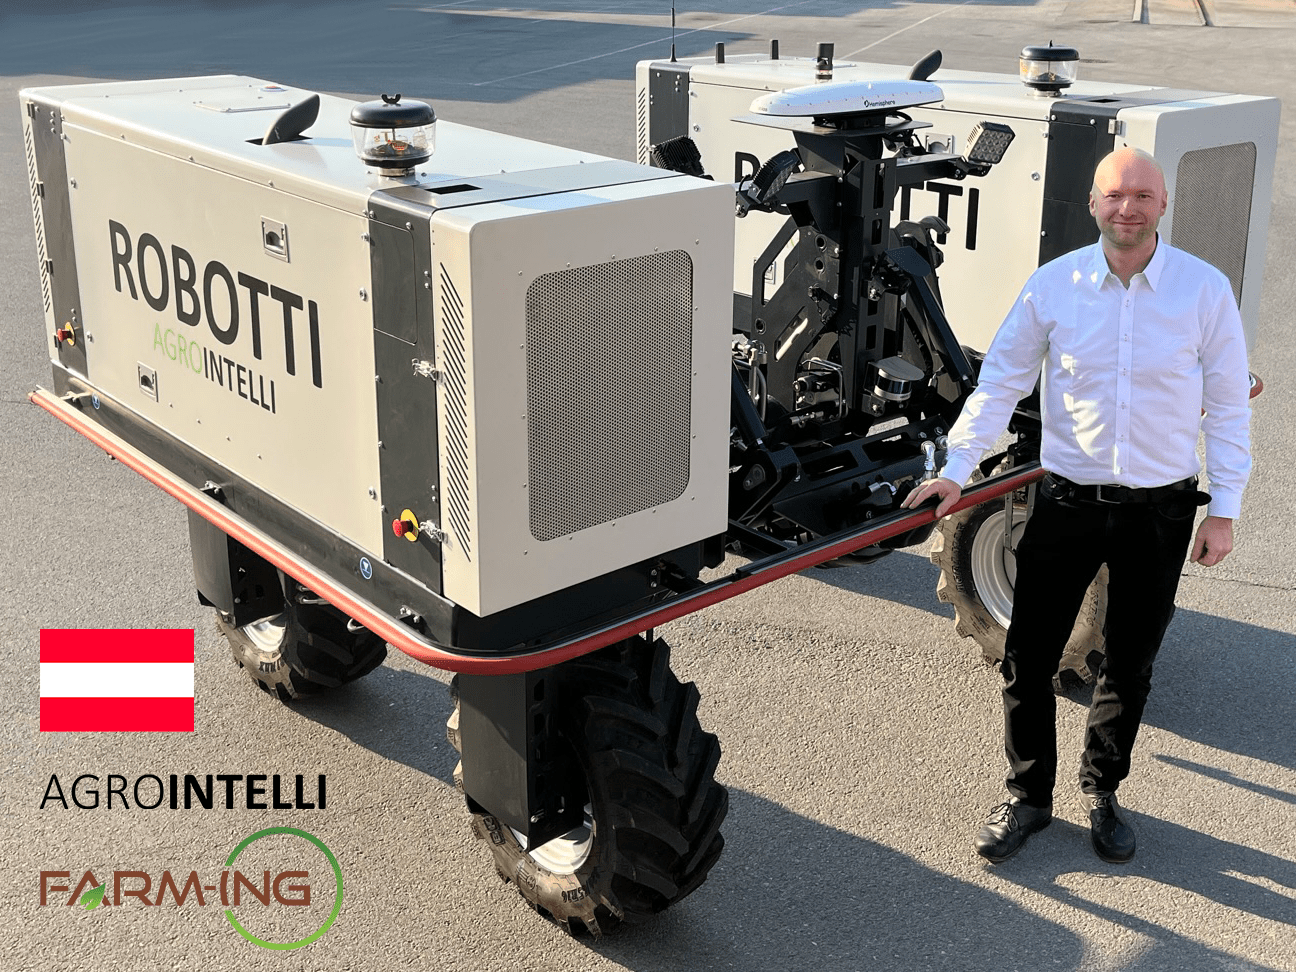 ROBOTTI is now available for farmers in Austria